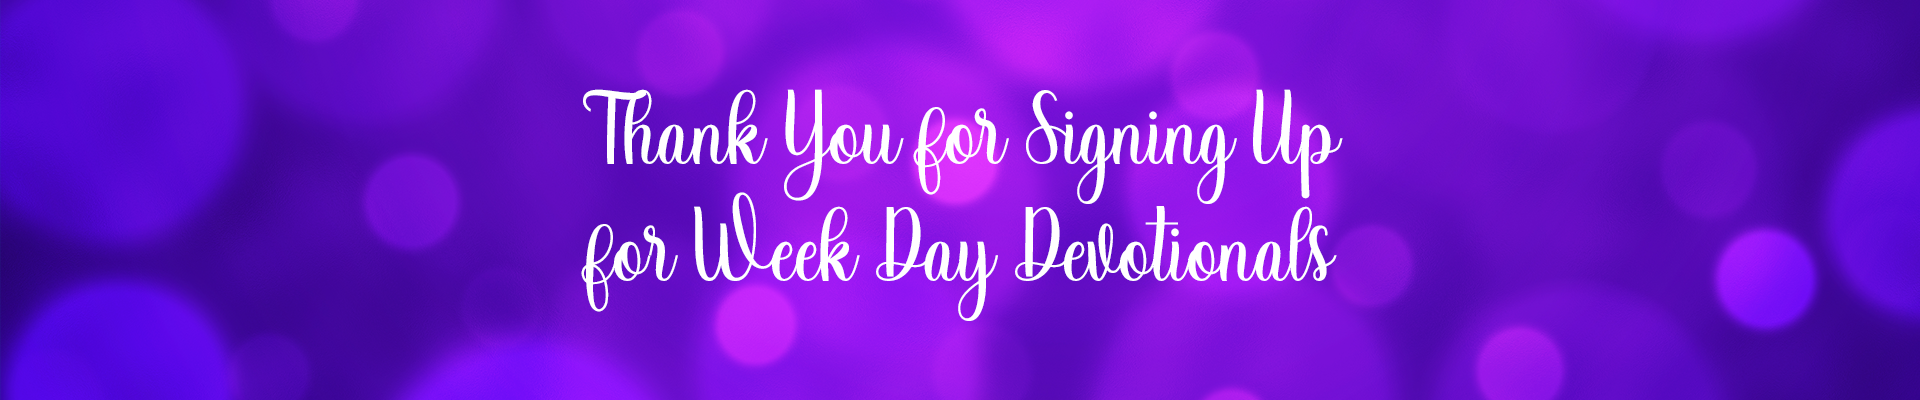 Week Day Devotionals to Your Email Box